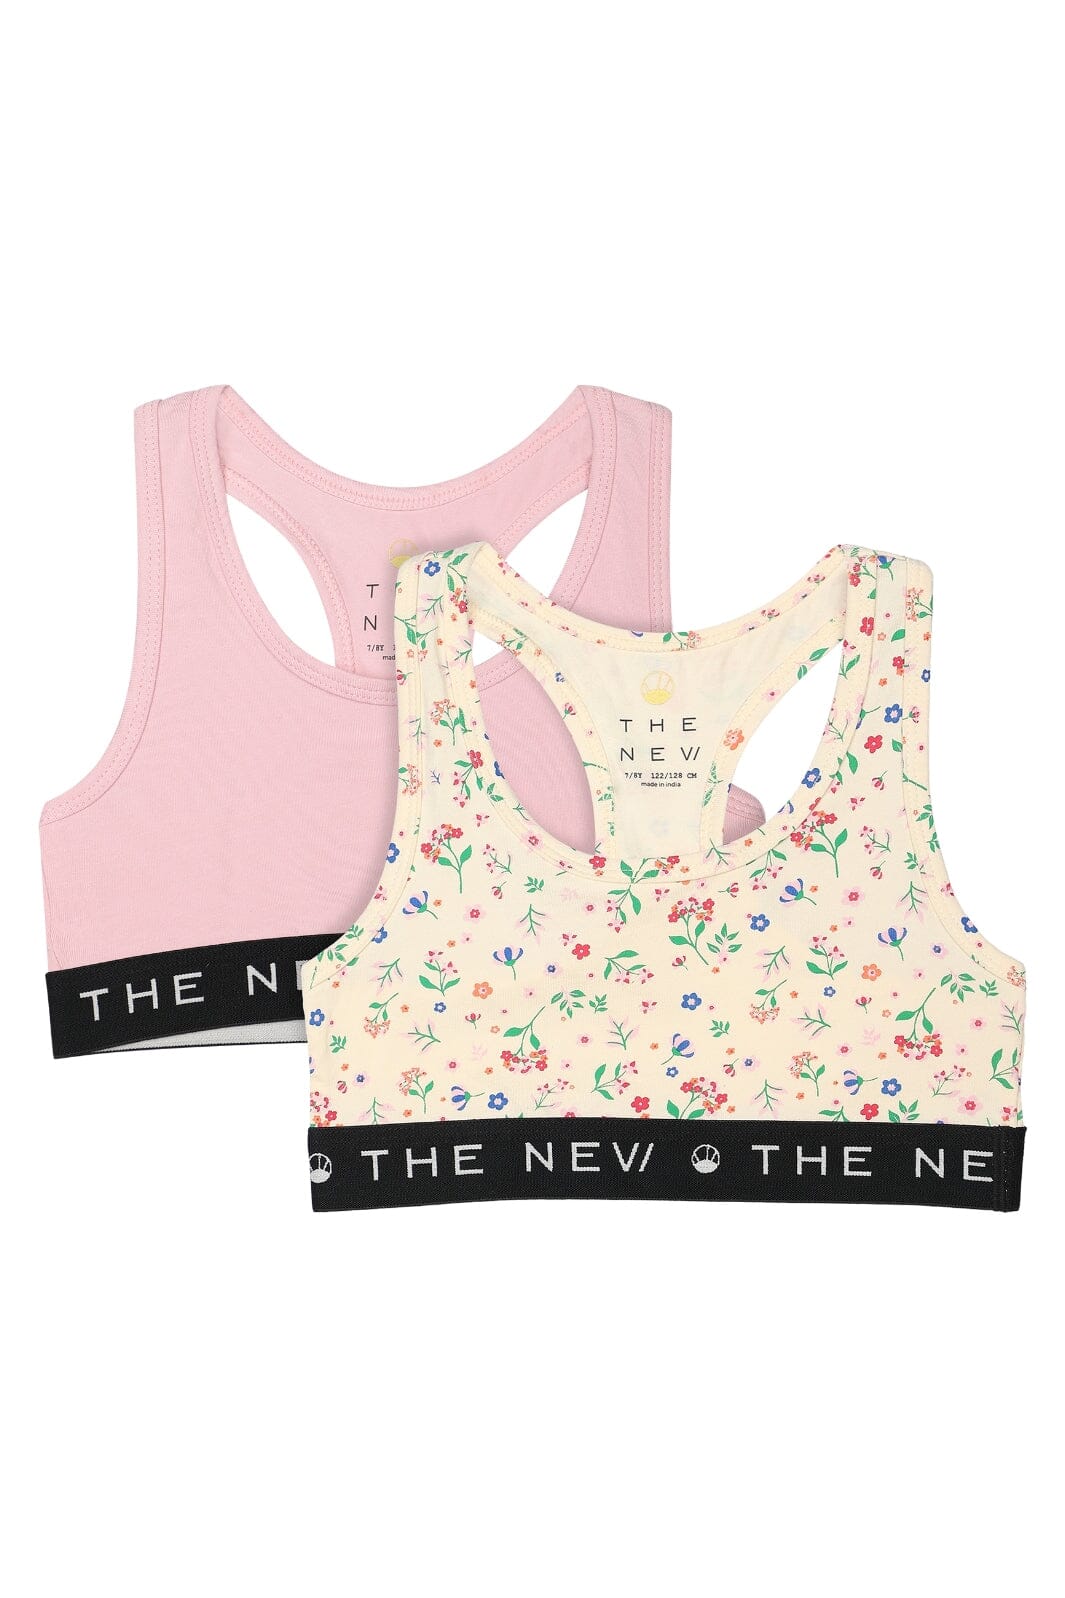 The New - The New Top 2-Pack - Pink Nectar Undertøj 